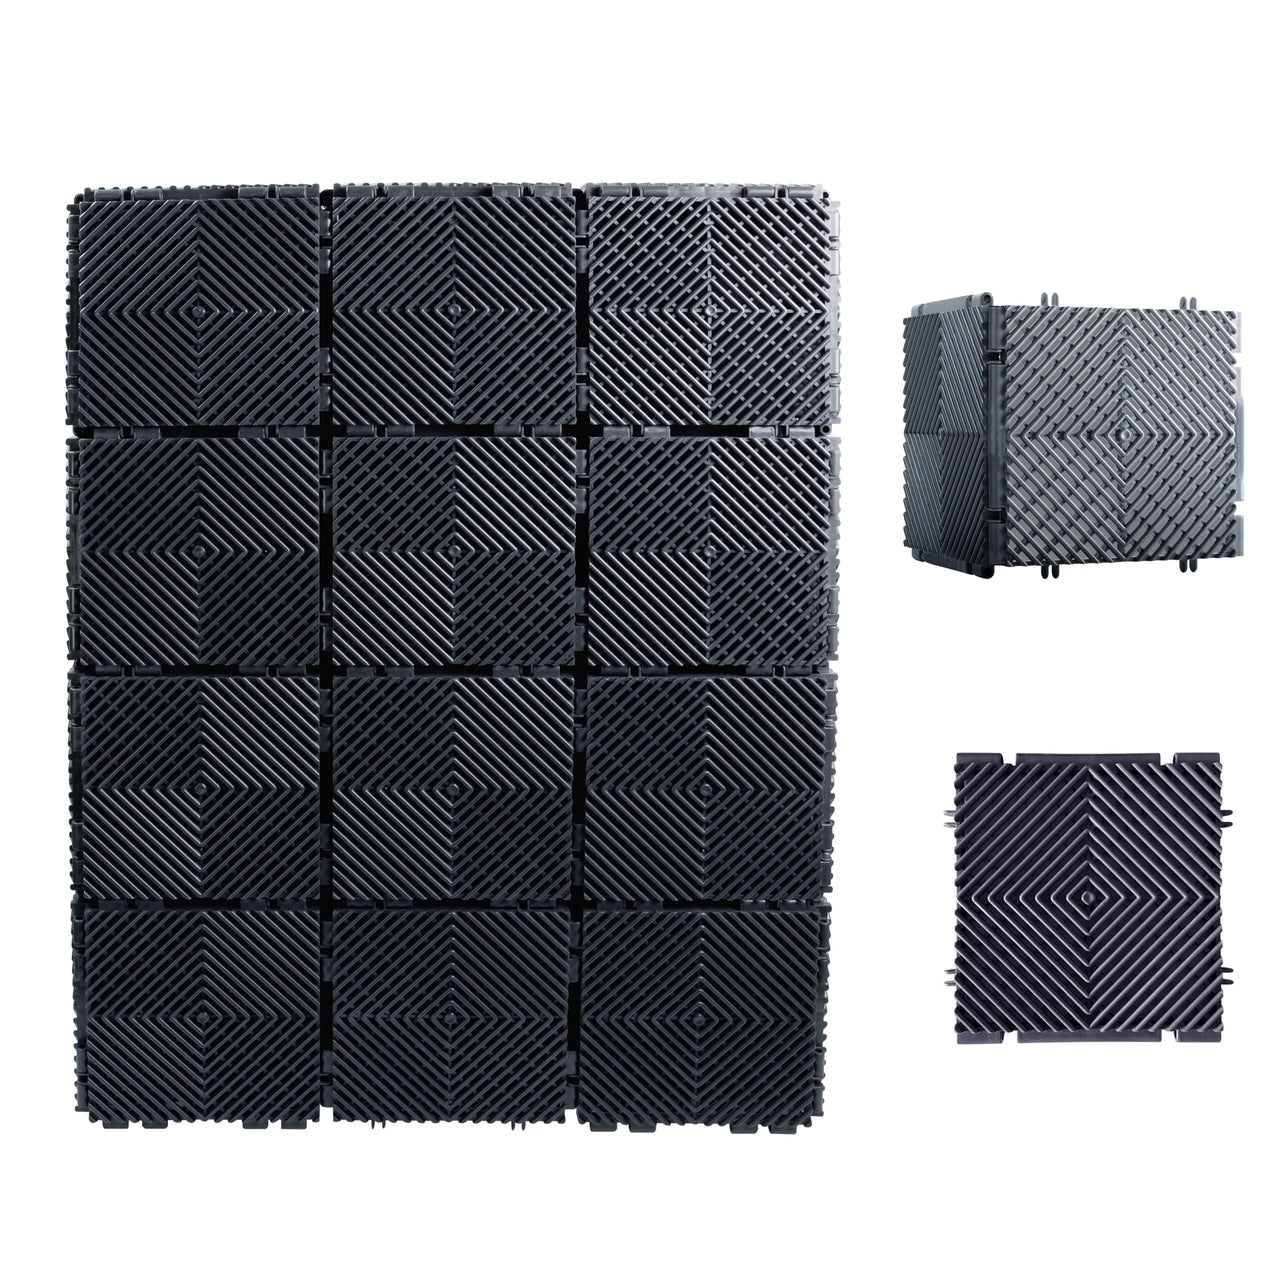 Ready Covers EZ Connect Interlocking Tiles - 50pc CHARCOAL